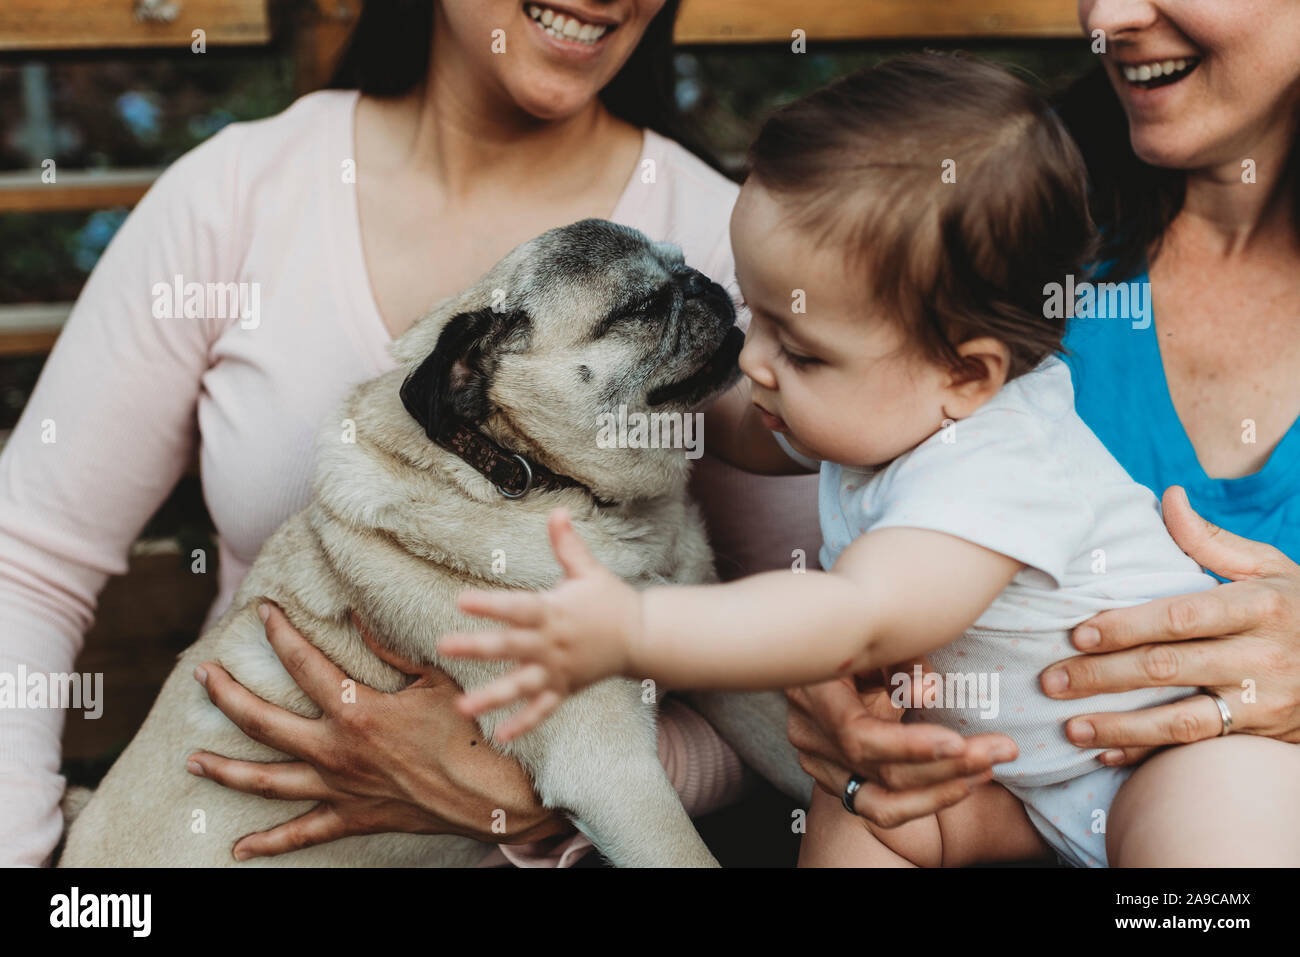 Baby girl with two smiling moms reaching for pet Pug Stock Photo